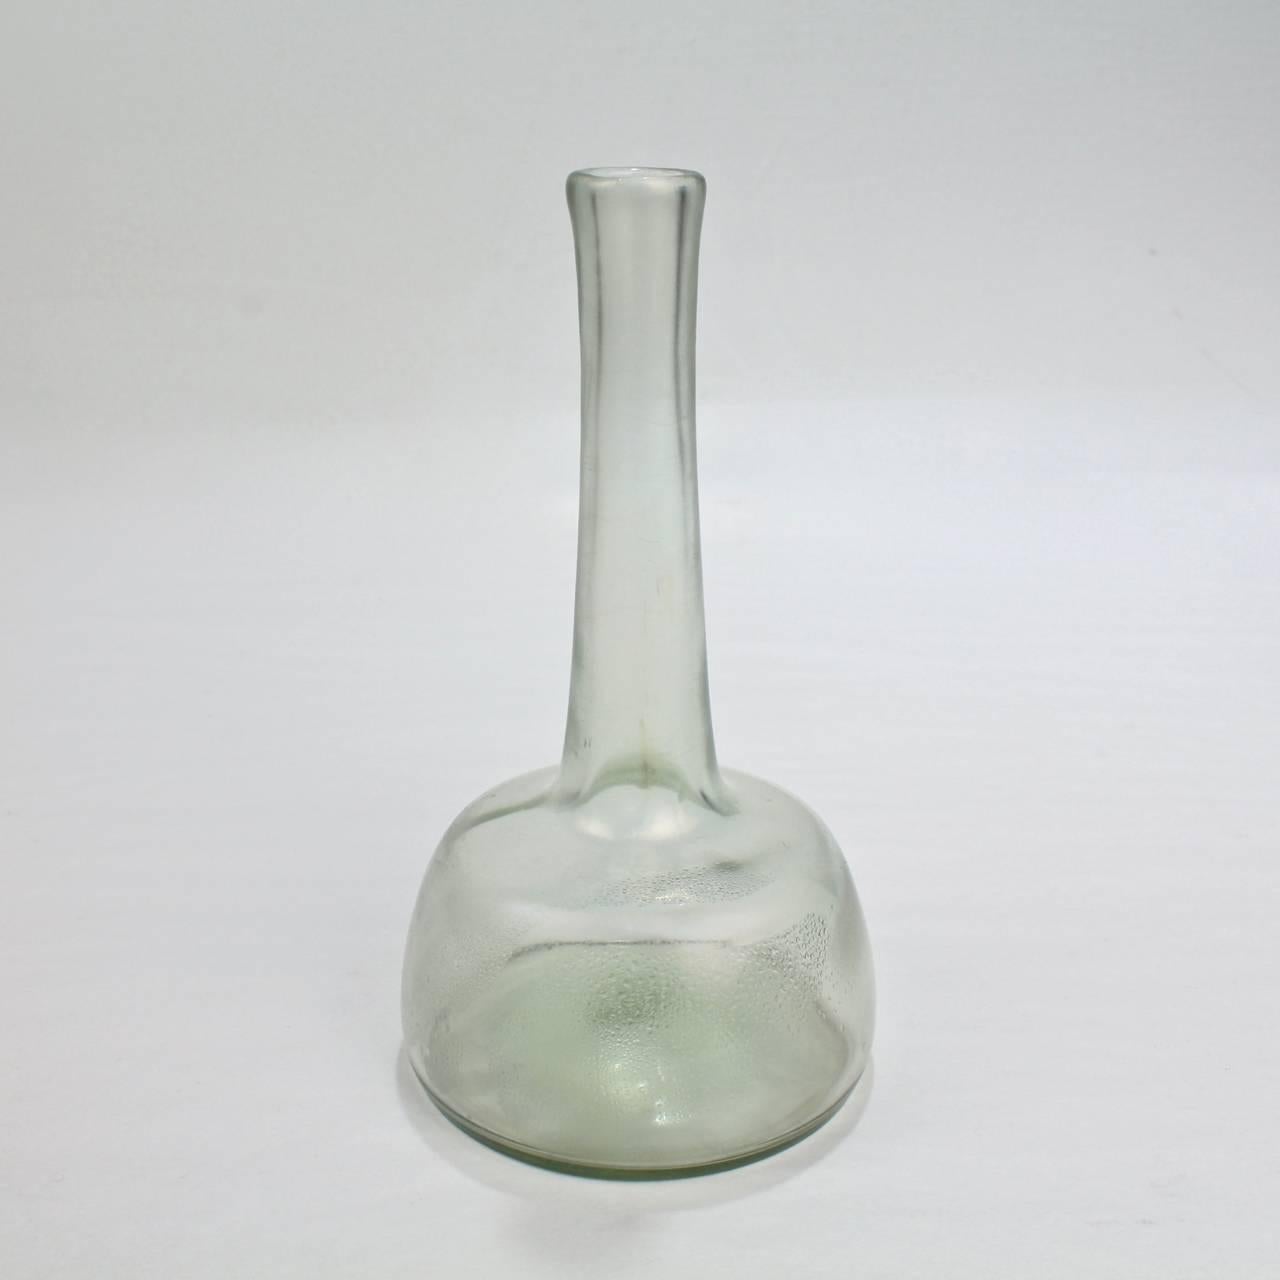 A fine, diminutive antique Loetz art glass vase in the rare Olympia Glatt pattern.

Leaning heavily on early Roman glass styles, this pattern in particular illustrates the Art Nouveau fascination with the glass of the Antique period. All the top